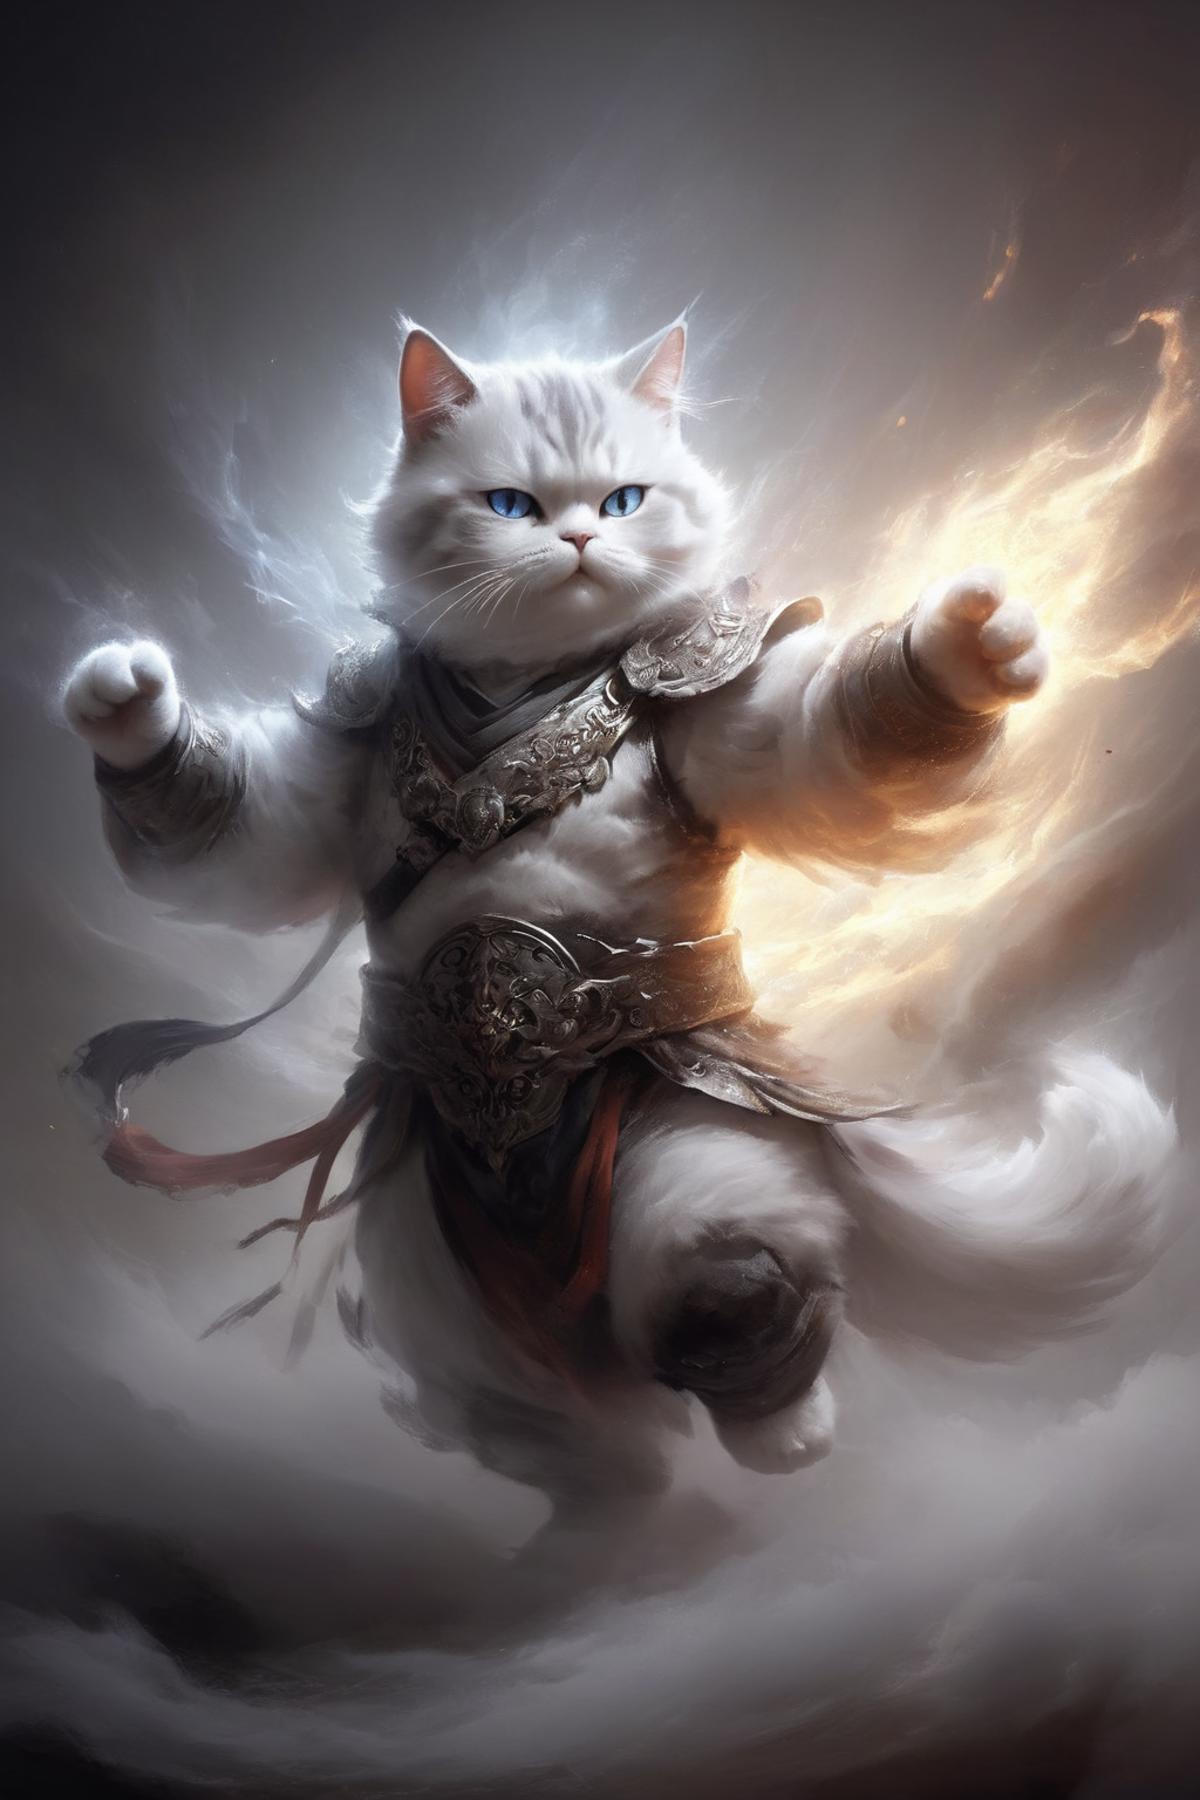 A white cat with blue eyes is wearing a knight's costume, holding a sword in its paw and flying through the air.